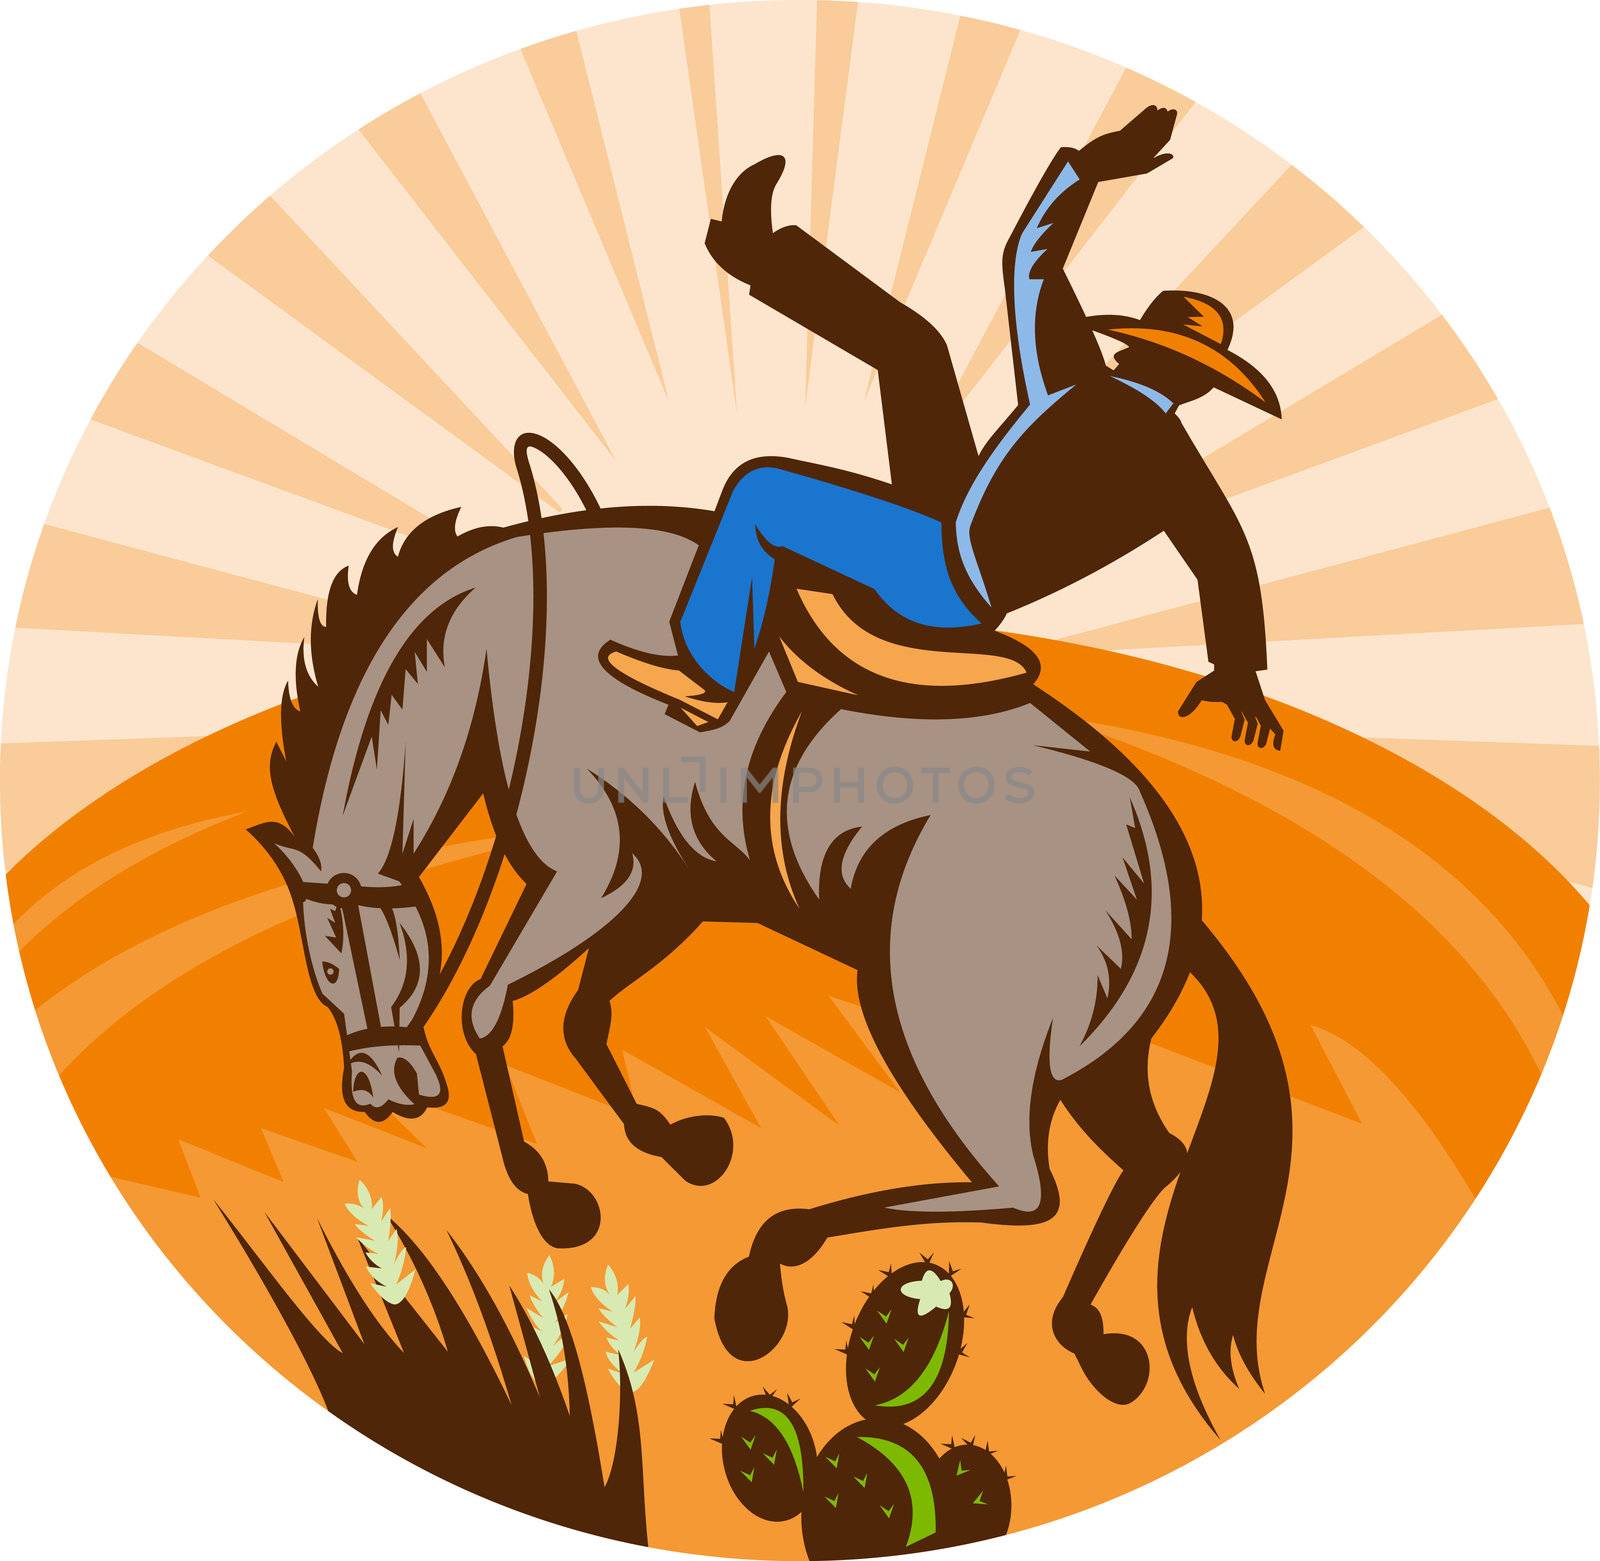 illustration of a cowboy falling off horse in the desert done in retro woodcut style.